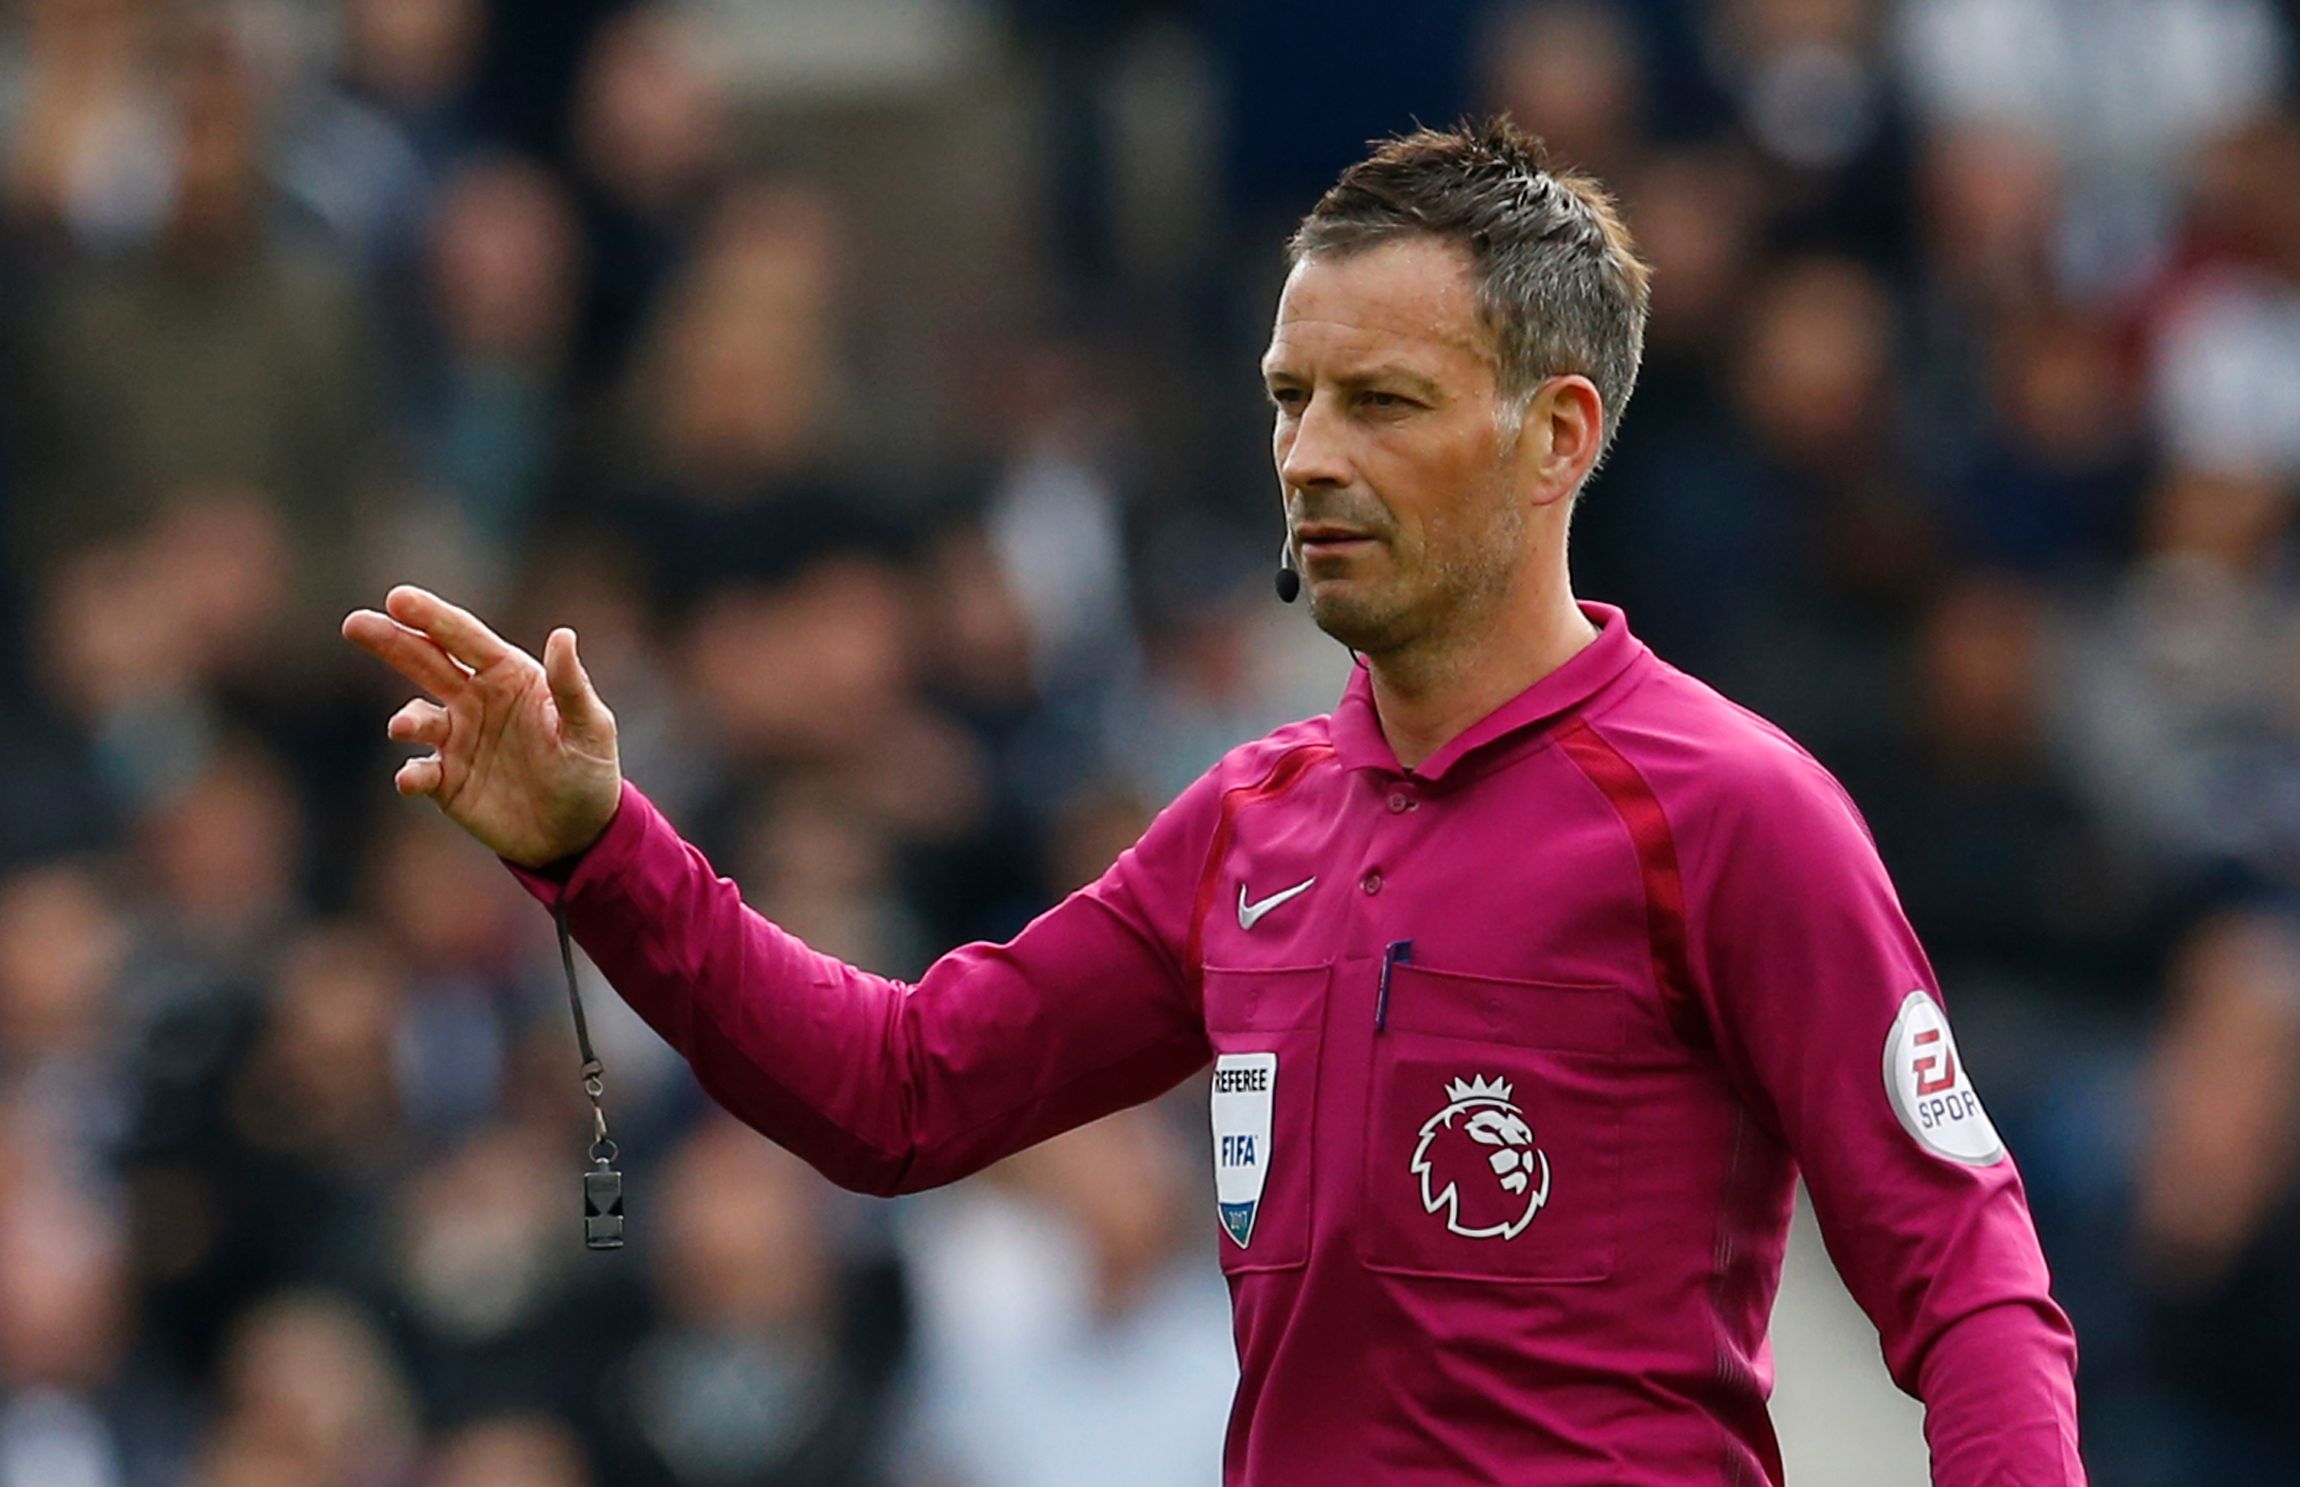 Britain Football Soccer - West Bromwich Albion v Leicester City - Premier League - The Hawthorns - 29/4/17 Referee Mark Clattenburg during his last Premier League match Action Images via Reuters / Andrew Boyers Livepic EDITORIAL USE ONLY. No use with unauthorized audio, video, data, fixture lists, club/league logos or 